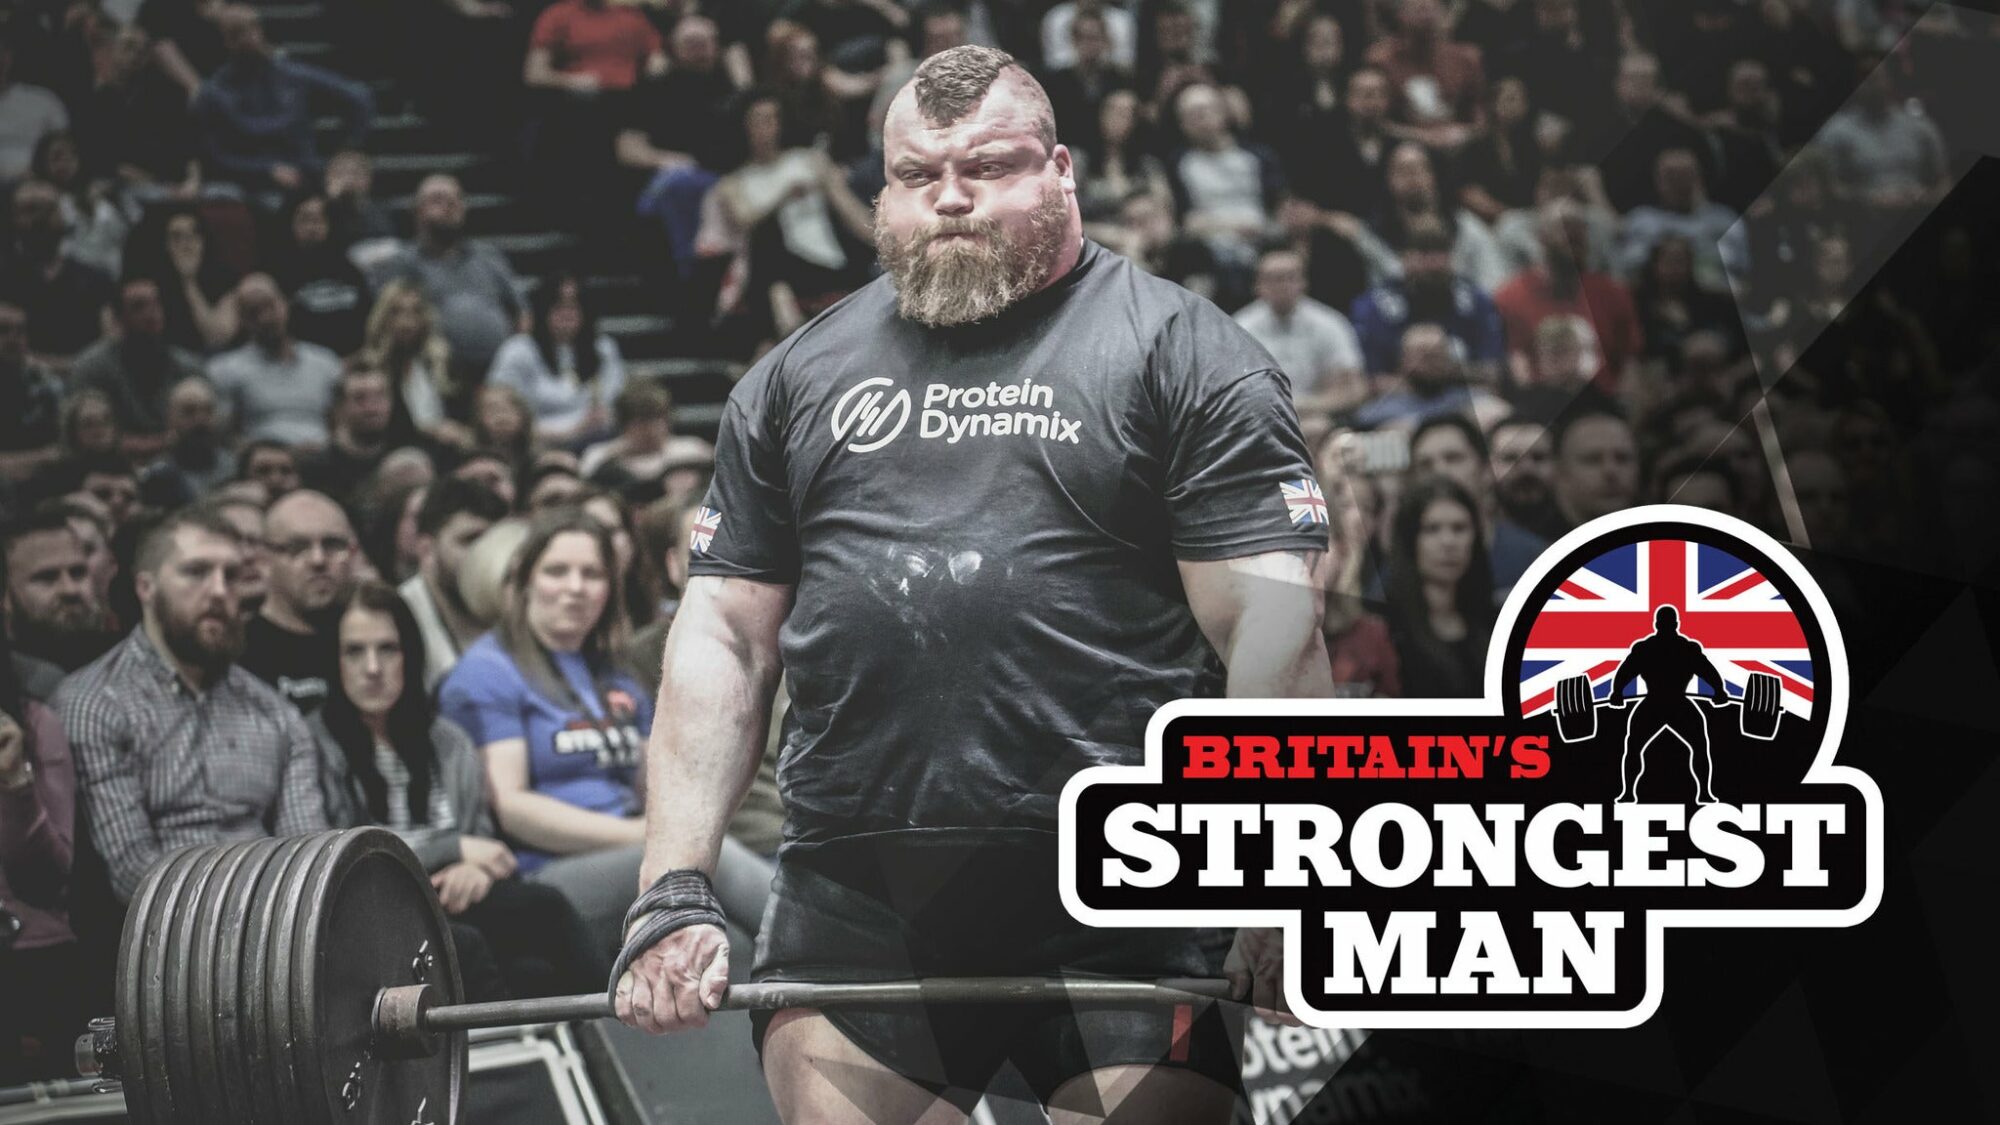 Image name Britains Strongest Man Hospitality Experiences at Utilita Arena Sheffield Sheffield the 15 image from the post Events in Yorkshire.com.